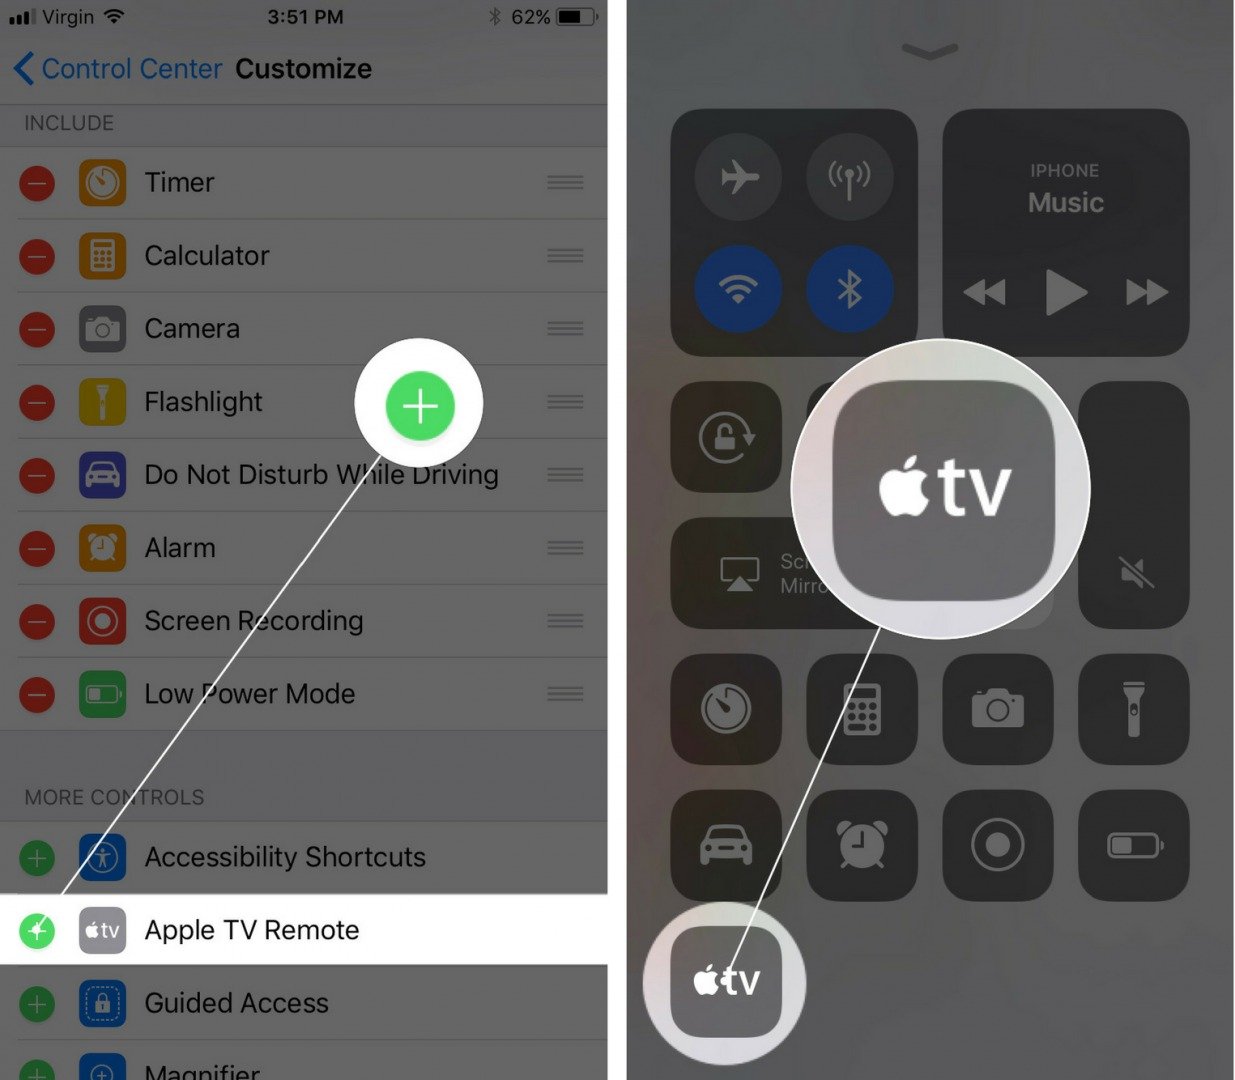 How To Add Apple TV Remote To Control Center On An iPhone!